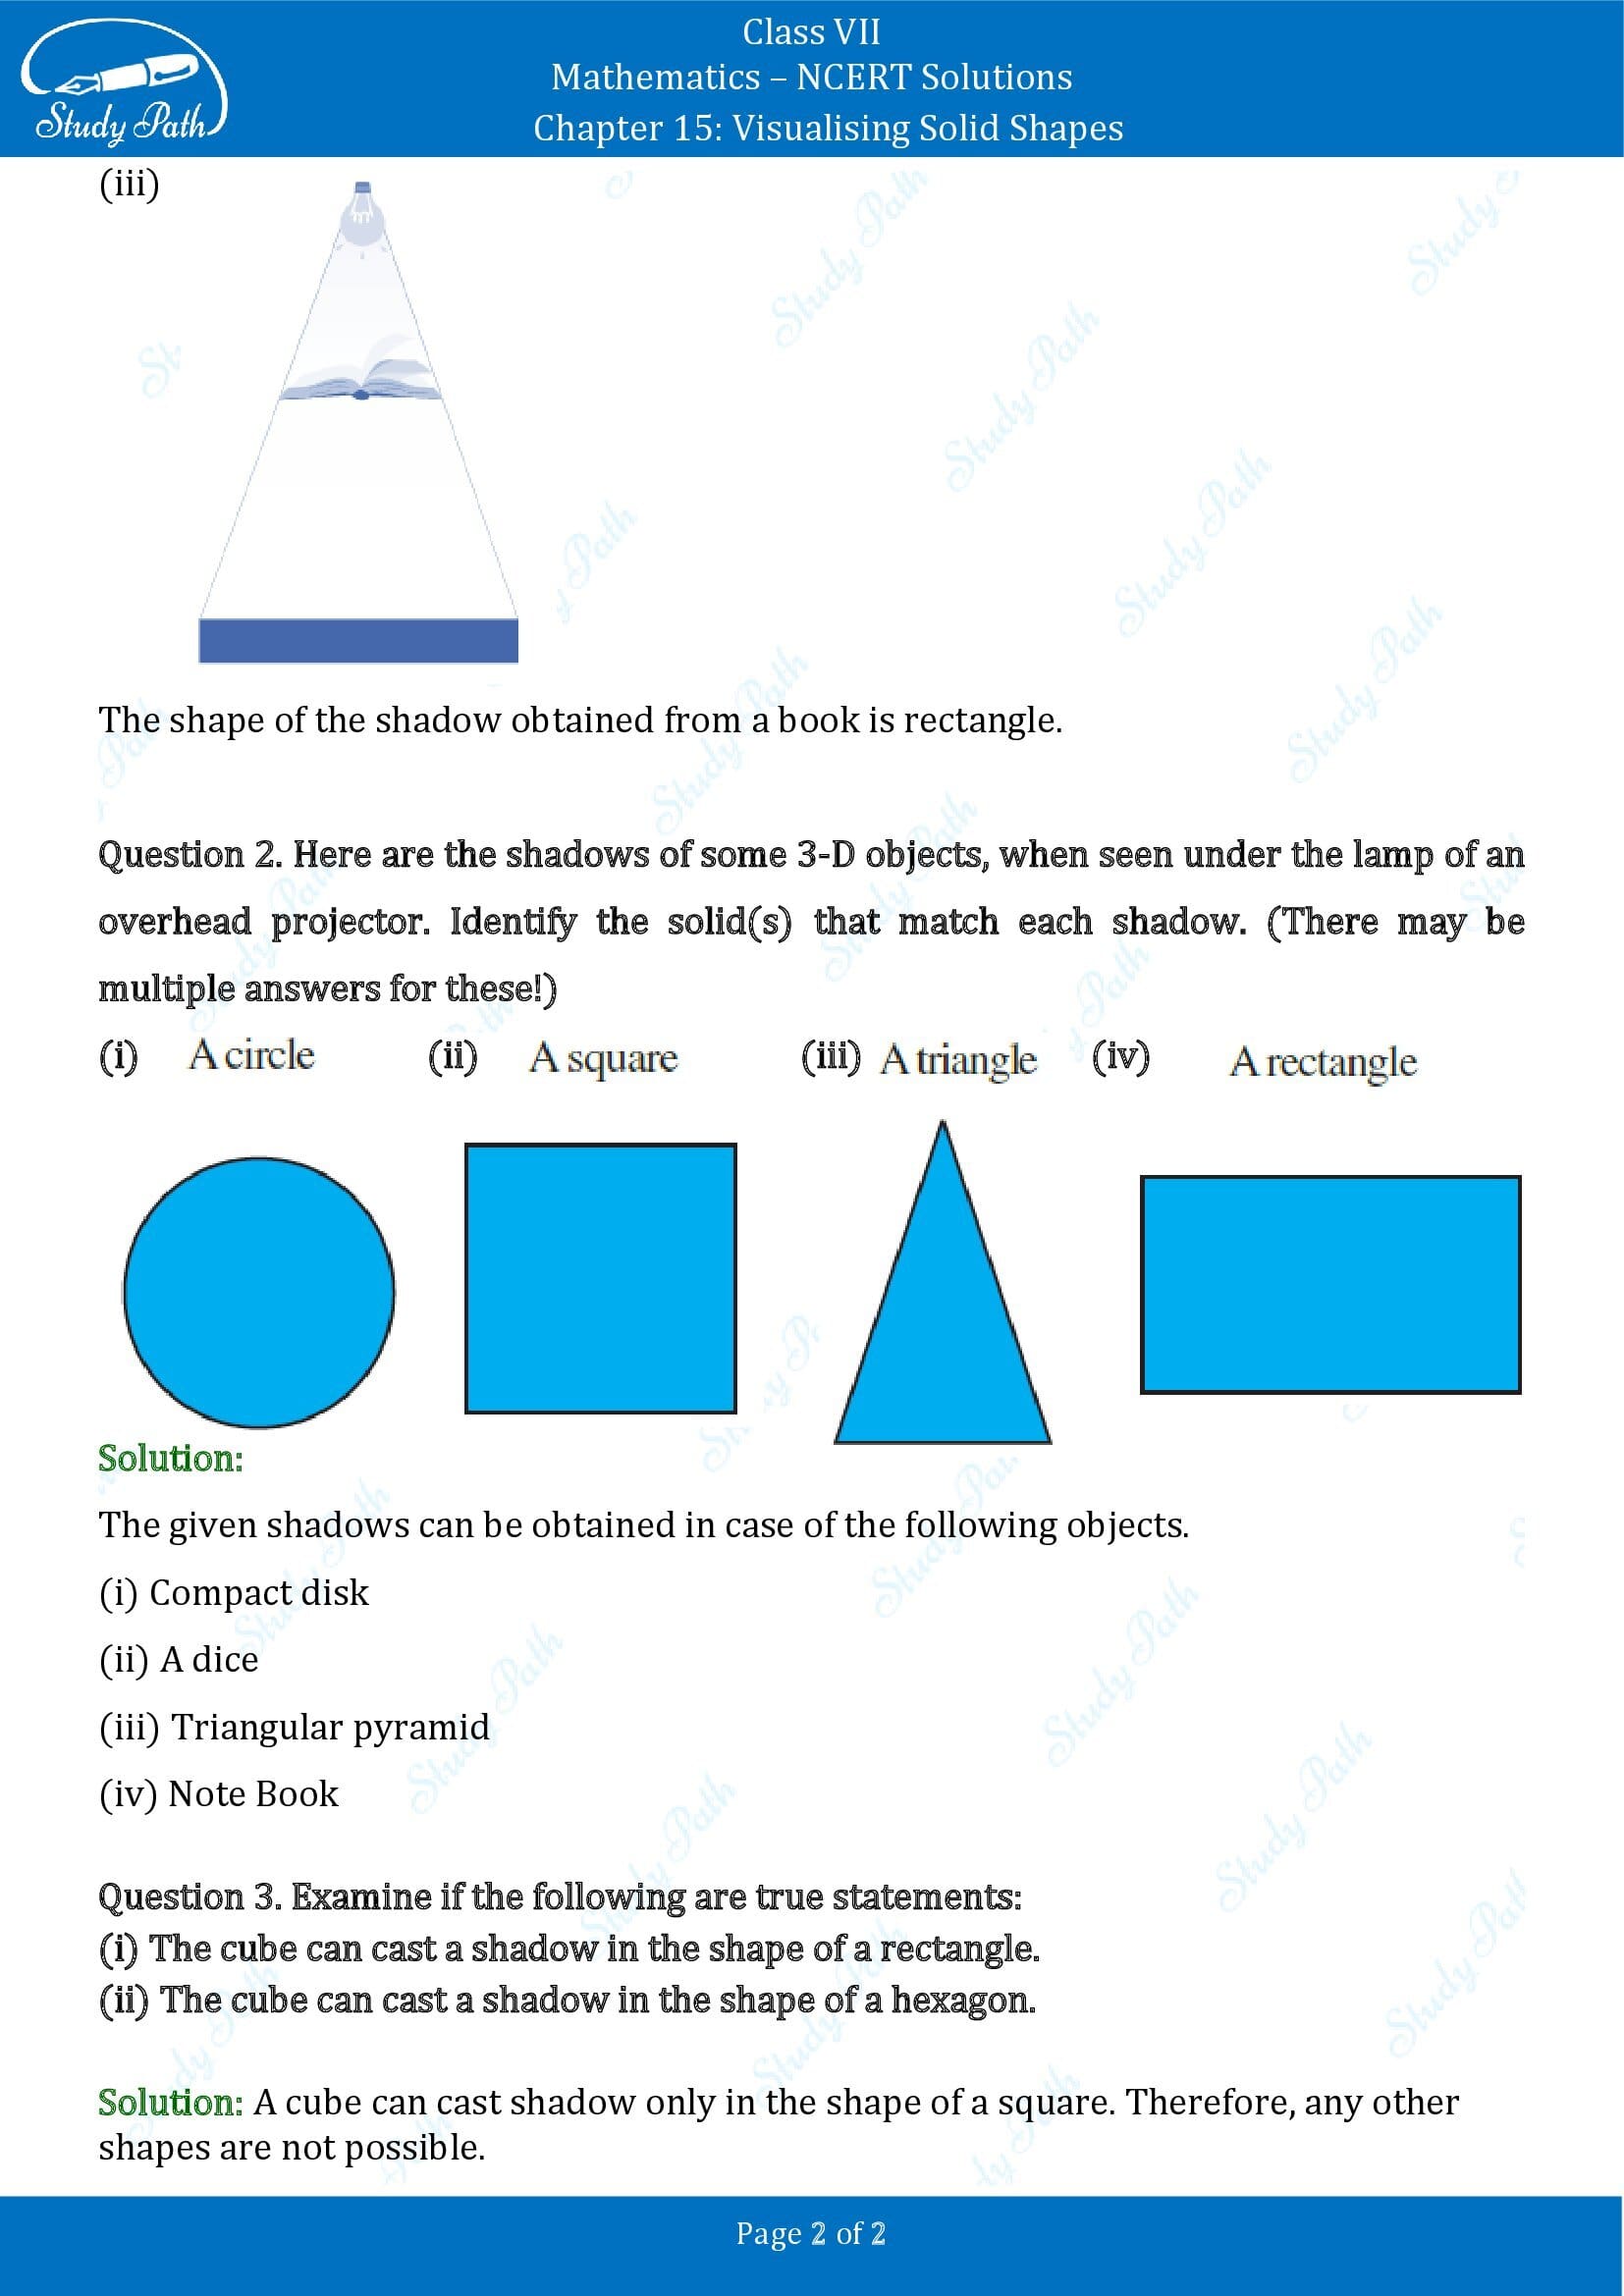 NCERT Solutions for Class 7 Maths Chapter 15 Visualising Solid Shapes Exericse 15.4 00002